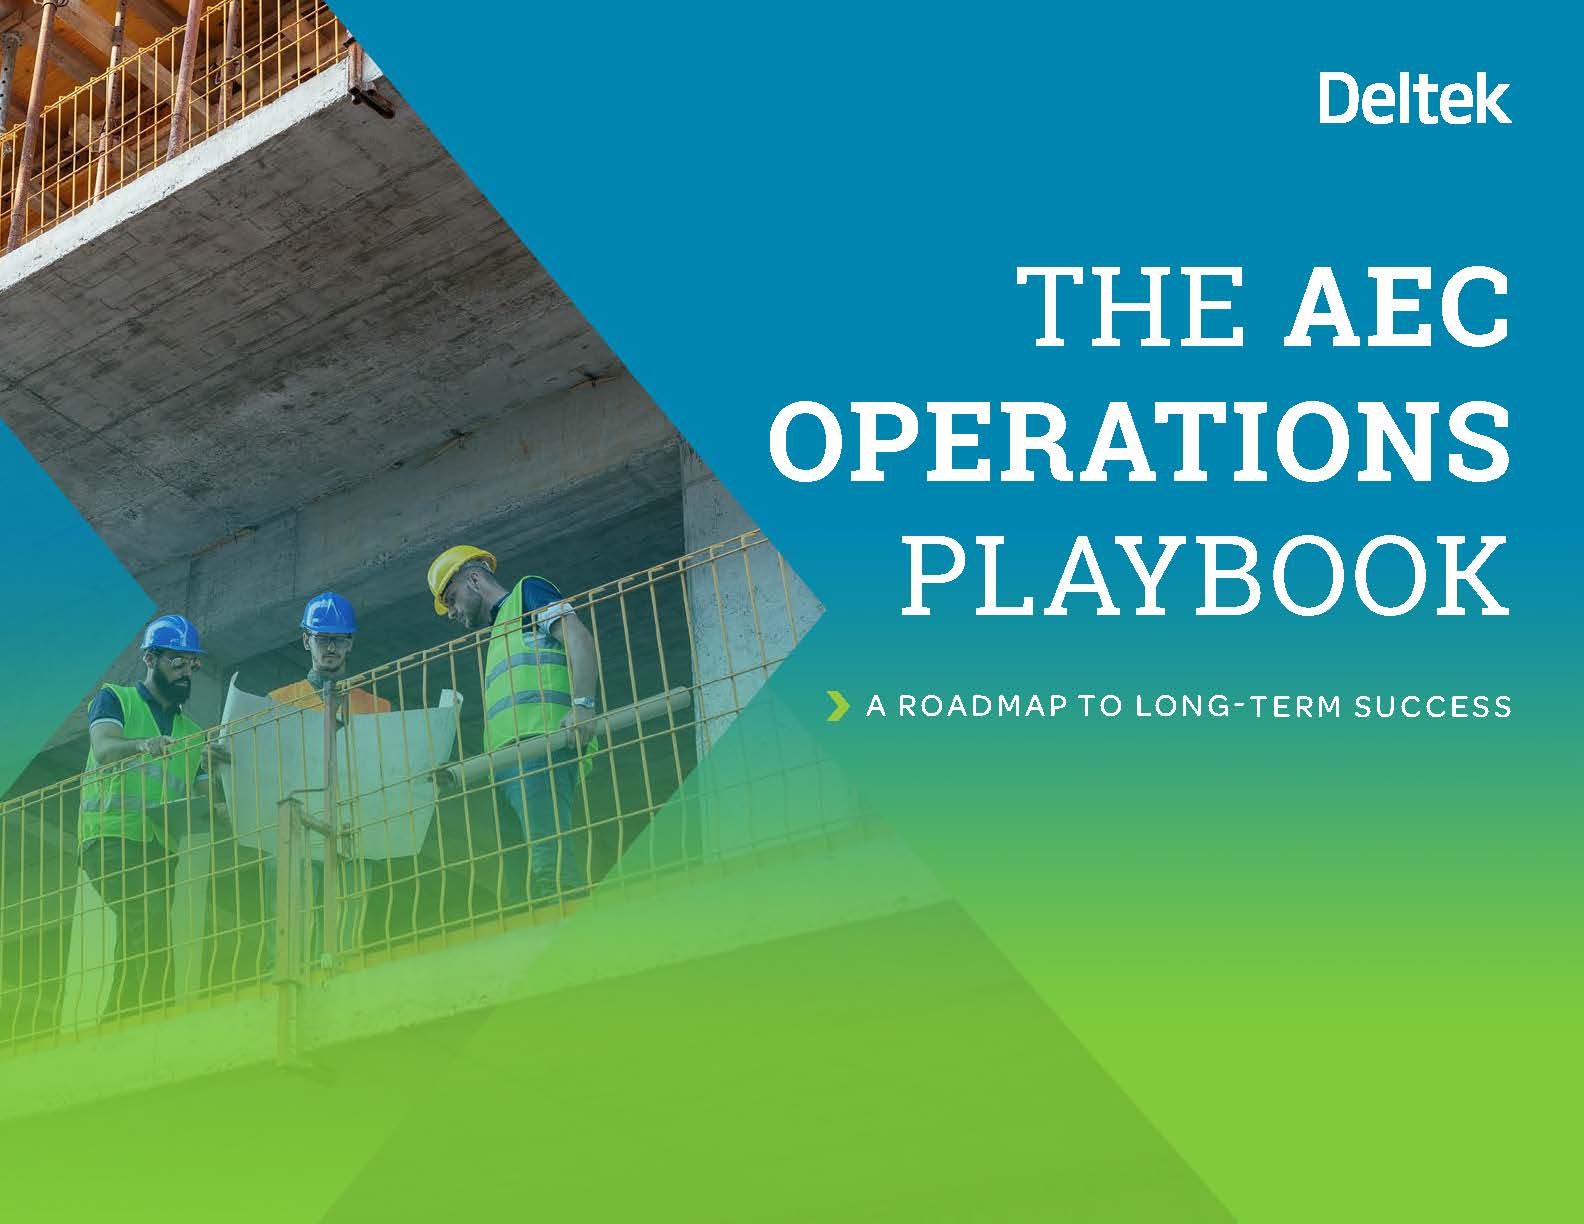 The AEC Operations Playbook